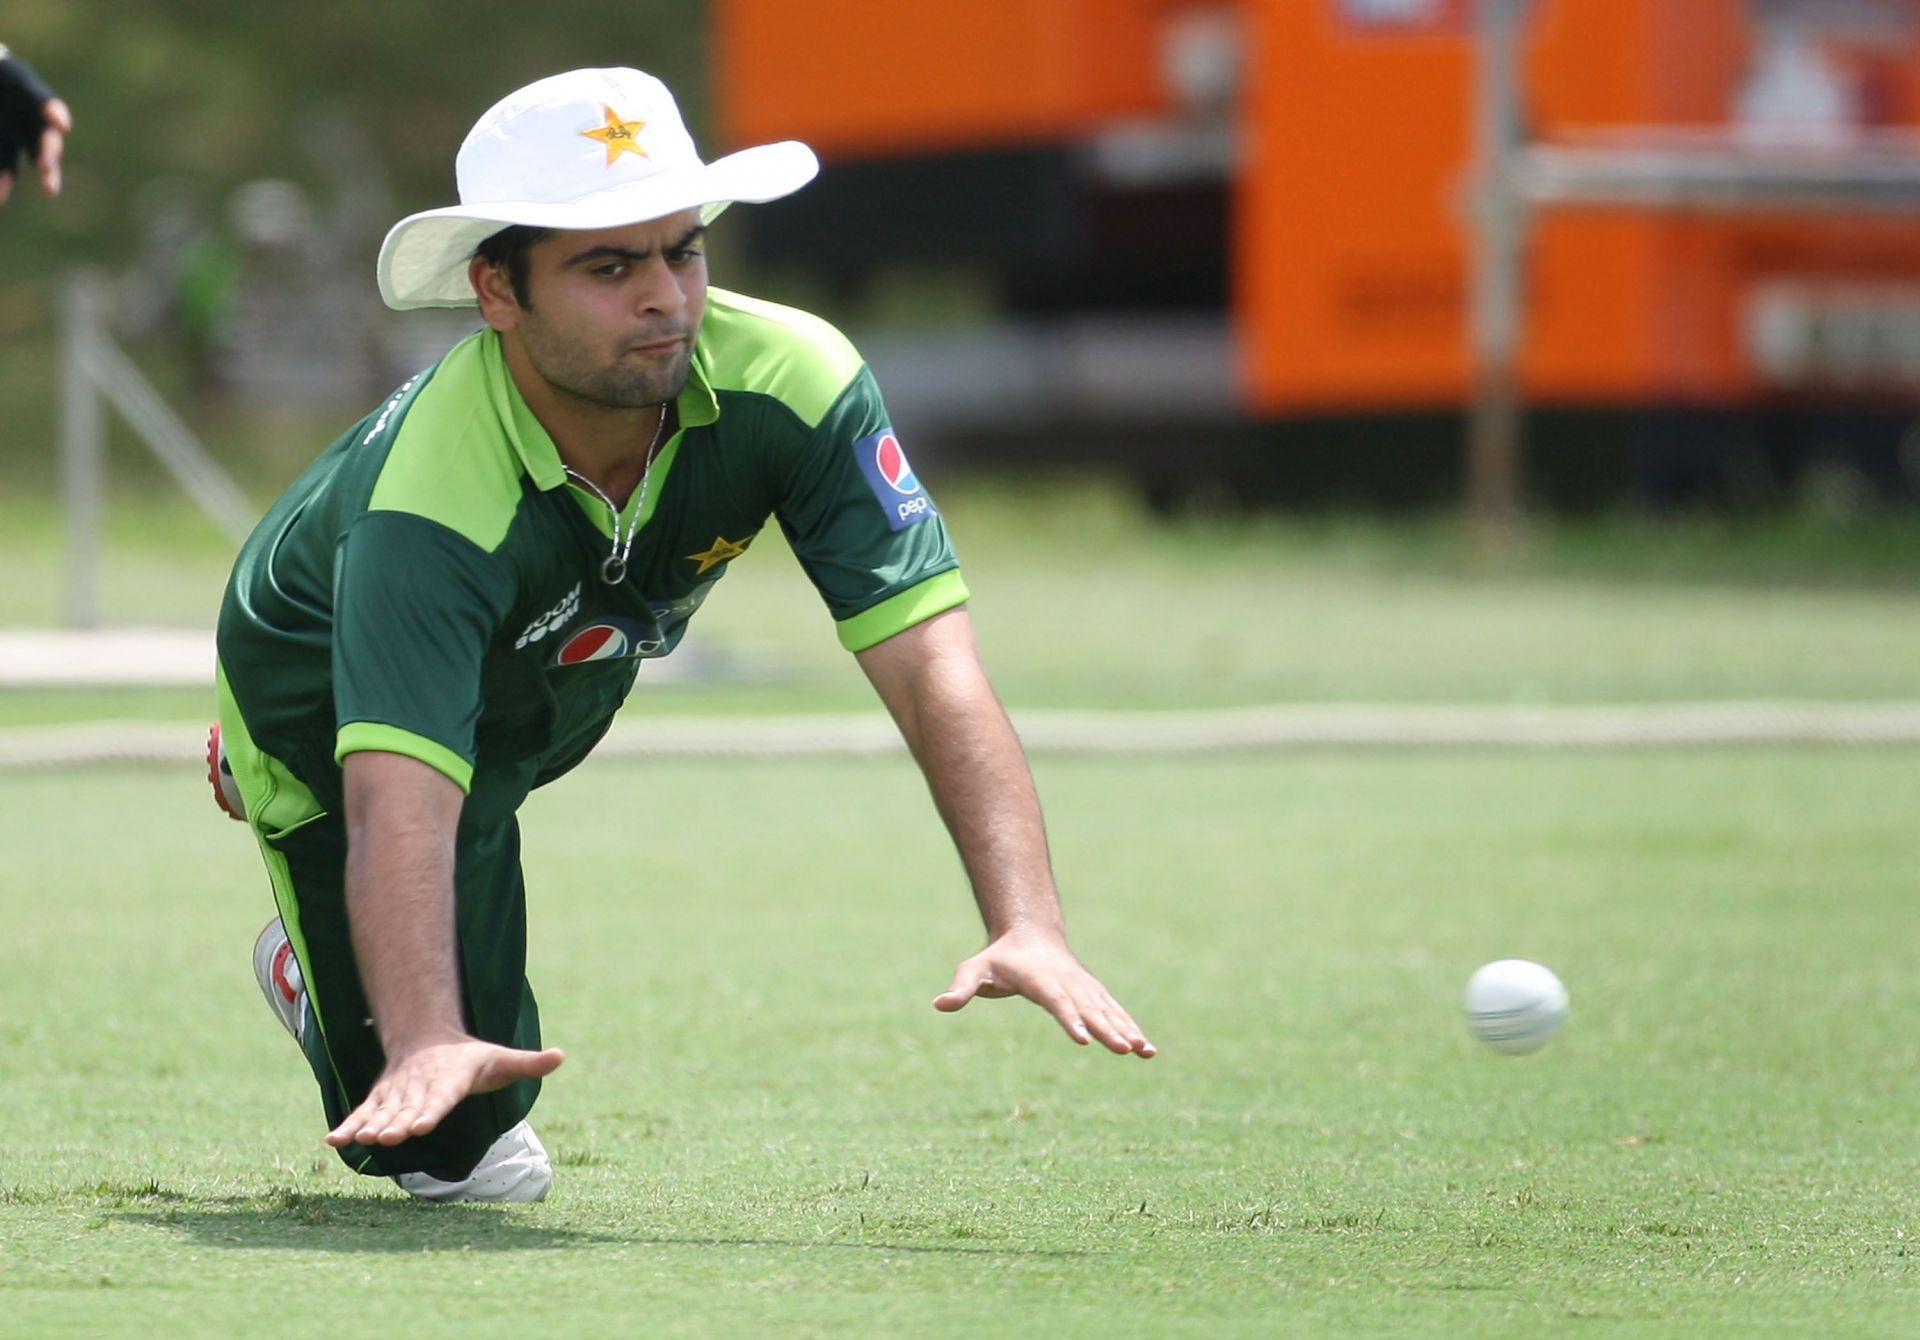 Ahmed Shehzad won the T20 World Cup with Pakistan in 2009 (Image: Getty)